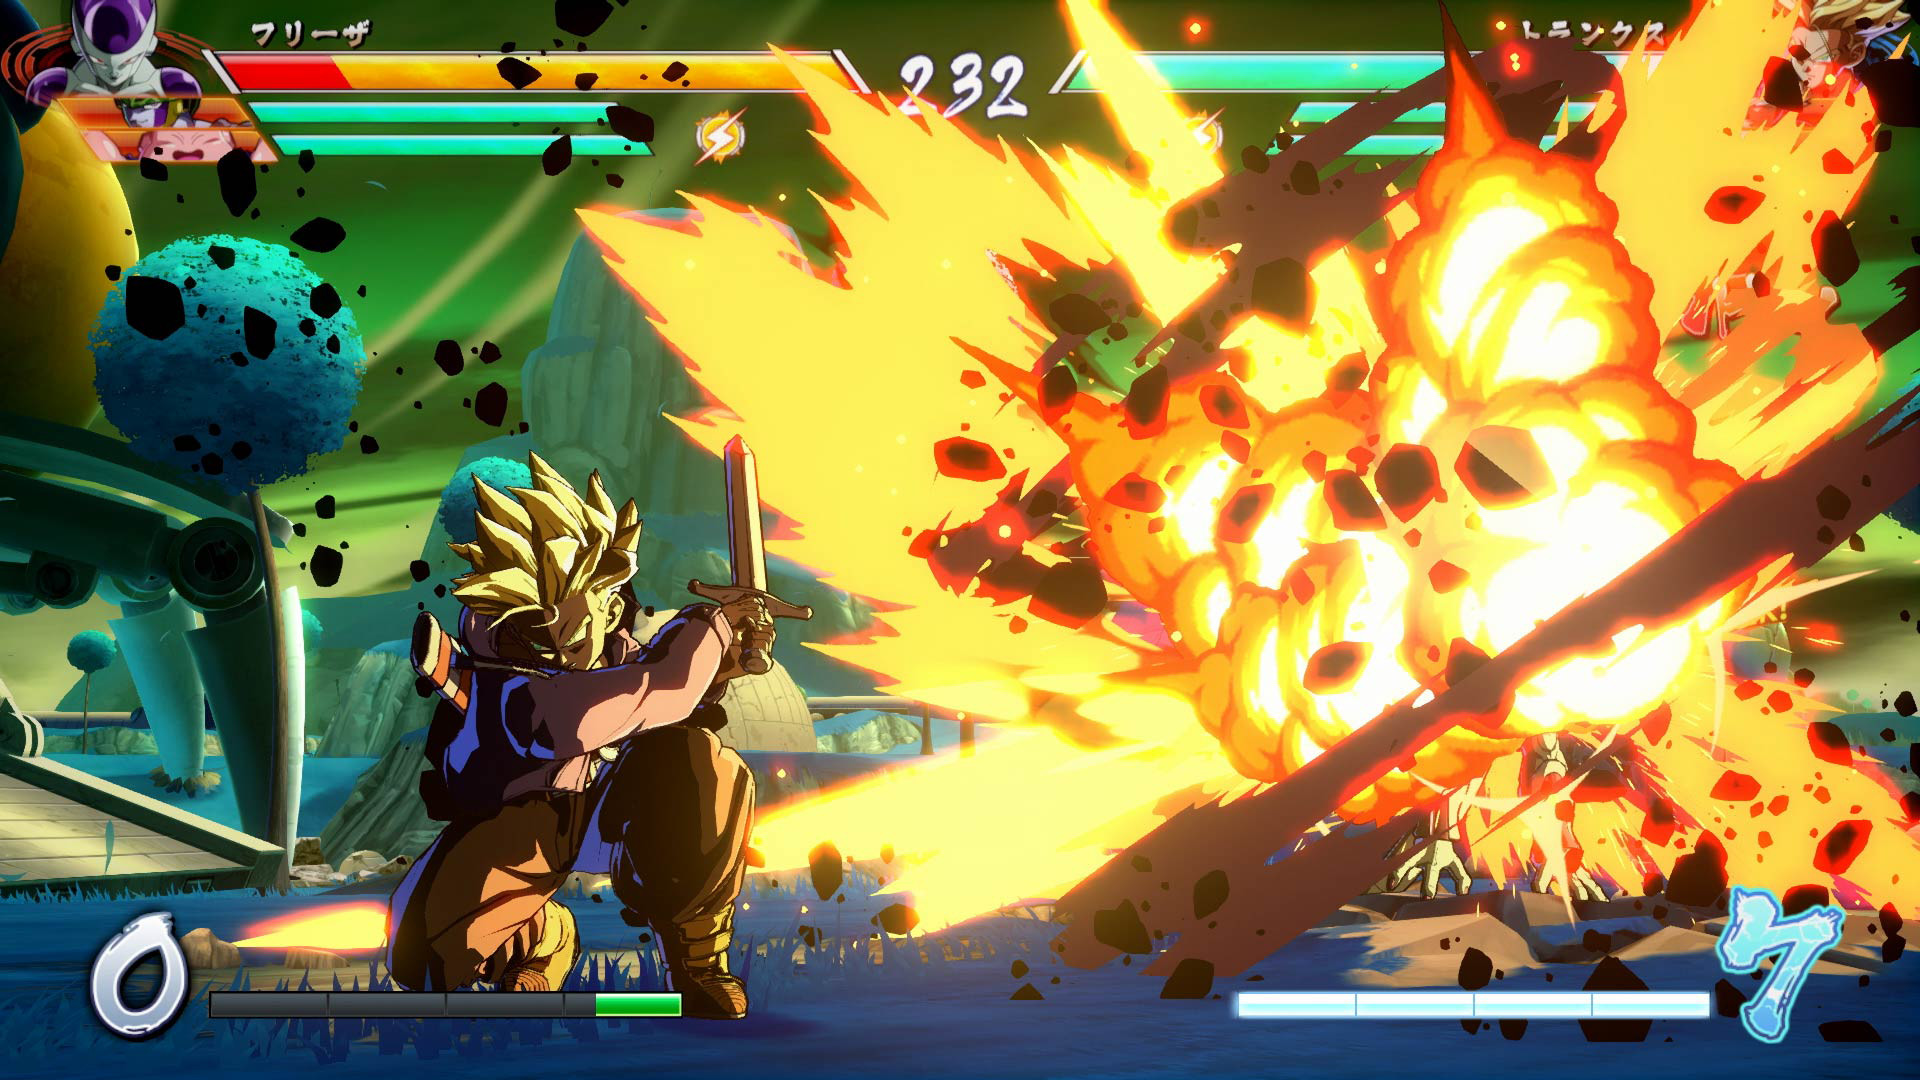 DBFZ Beginner Guide: Controls, Moves, Tips